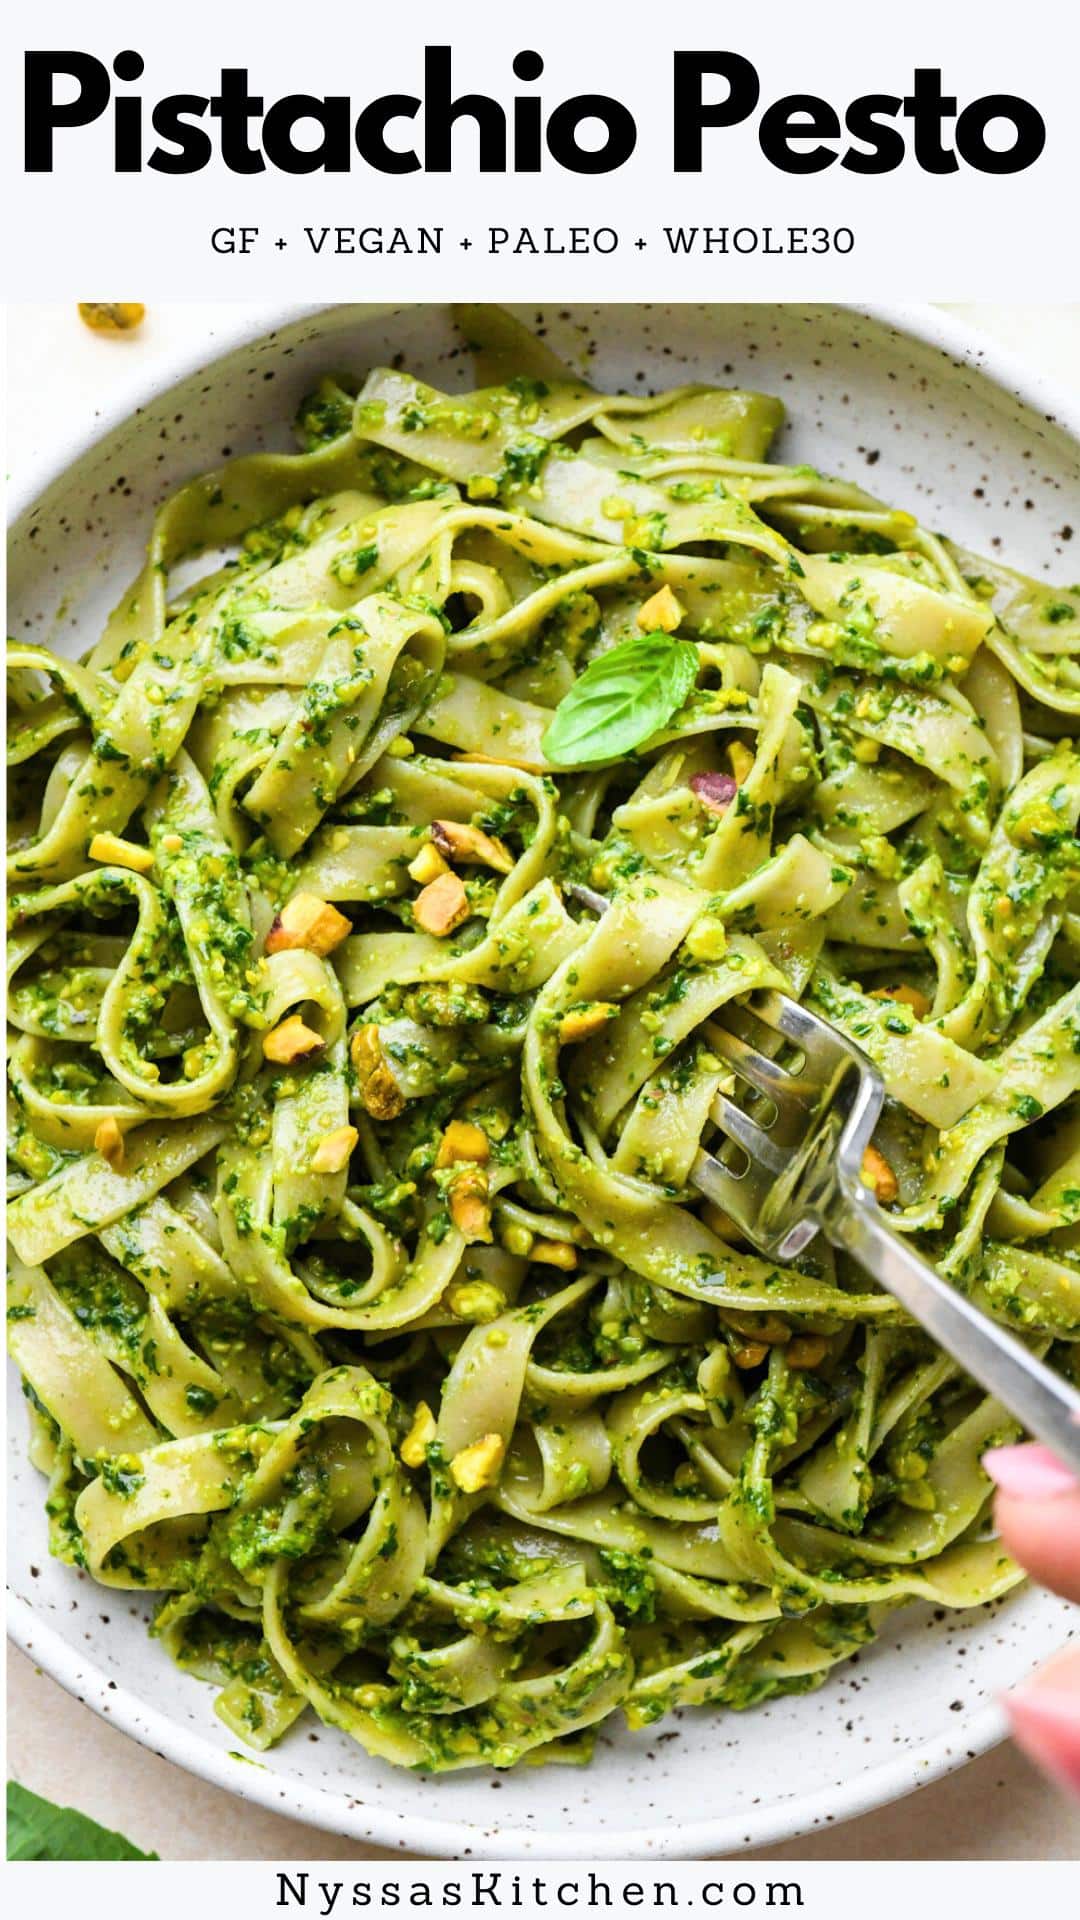 This 5-minute pistachio pesto is a fresh and herbaceous twist on a classic pesto recipe. Made in a food processor or blender with fresh basil, sweet pistachios, zippy garlic, and olive oil. It's the perfect versatile sauce to have on hand for a quick dinner, lunch, or appetizer! Gluten free, vegan, low carb, keto friendly, paleo, and Whole30 compatible.